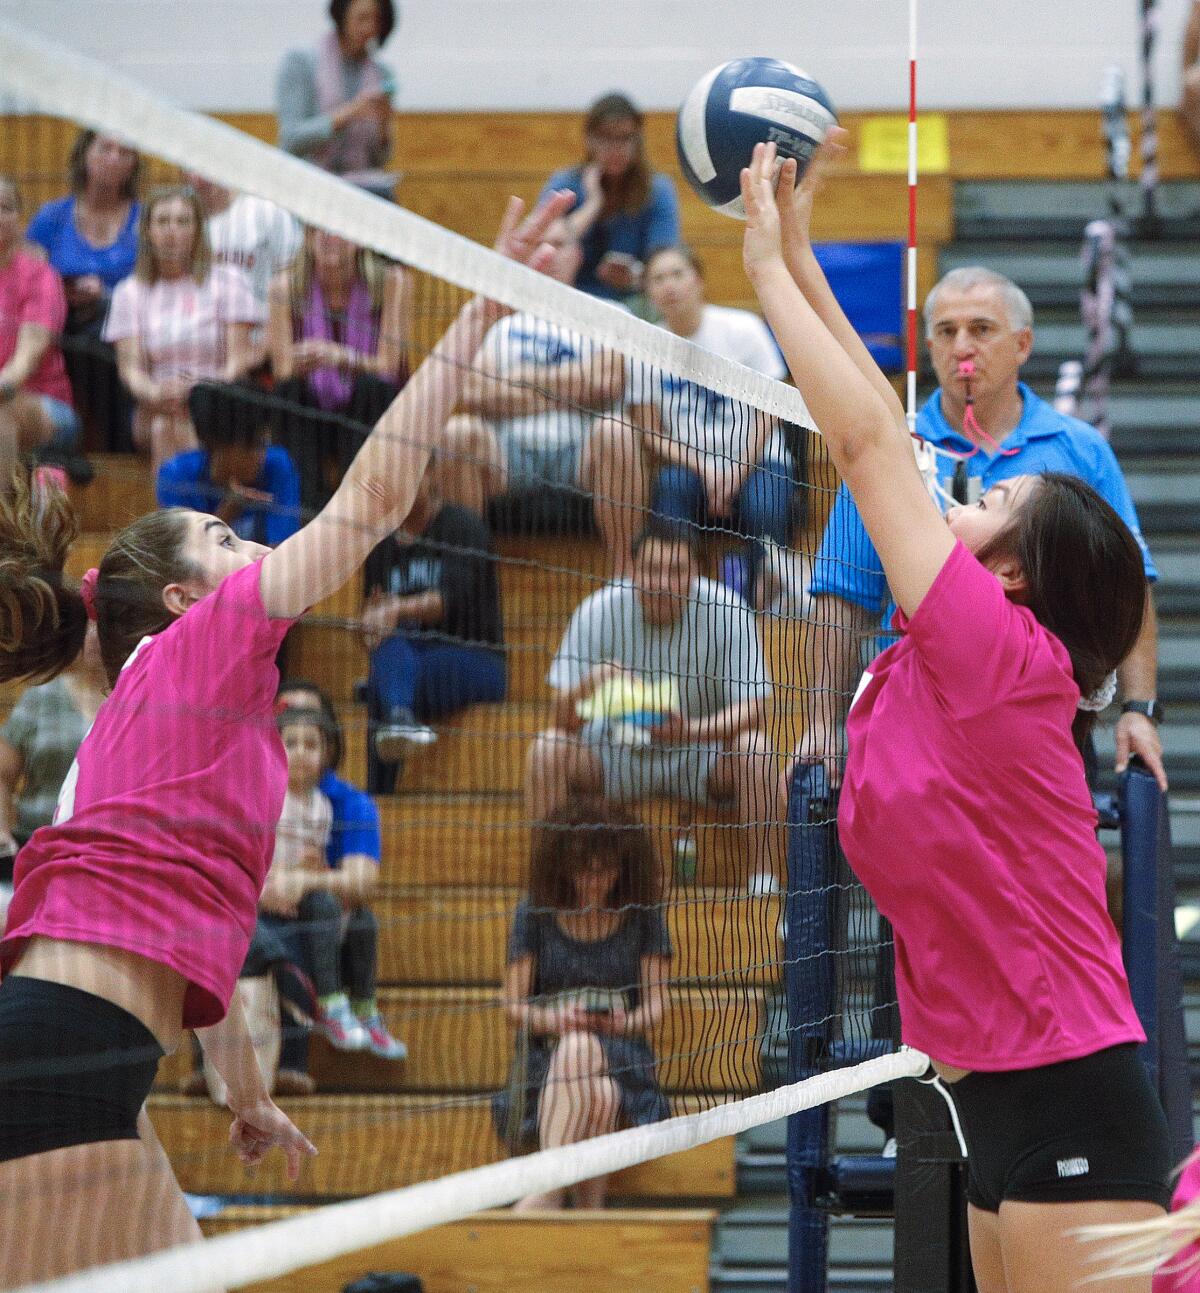 Crescenta Valley's Ellie Song and Burbank's Leah Tawil battle for a point at the top of the net in a Pacific League girls' volleyball match at Crescenta Valley High School on Thursday, October 10, 2019.in a Pacific League girls' volleyball match at Crescenta Valley High School on Thursday, October 10, 2019. Both teams wore the exact same color pink jersey in honor of Breast Cancer Awareness month.